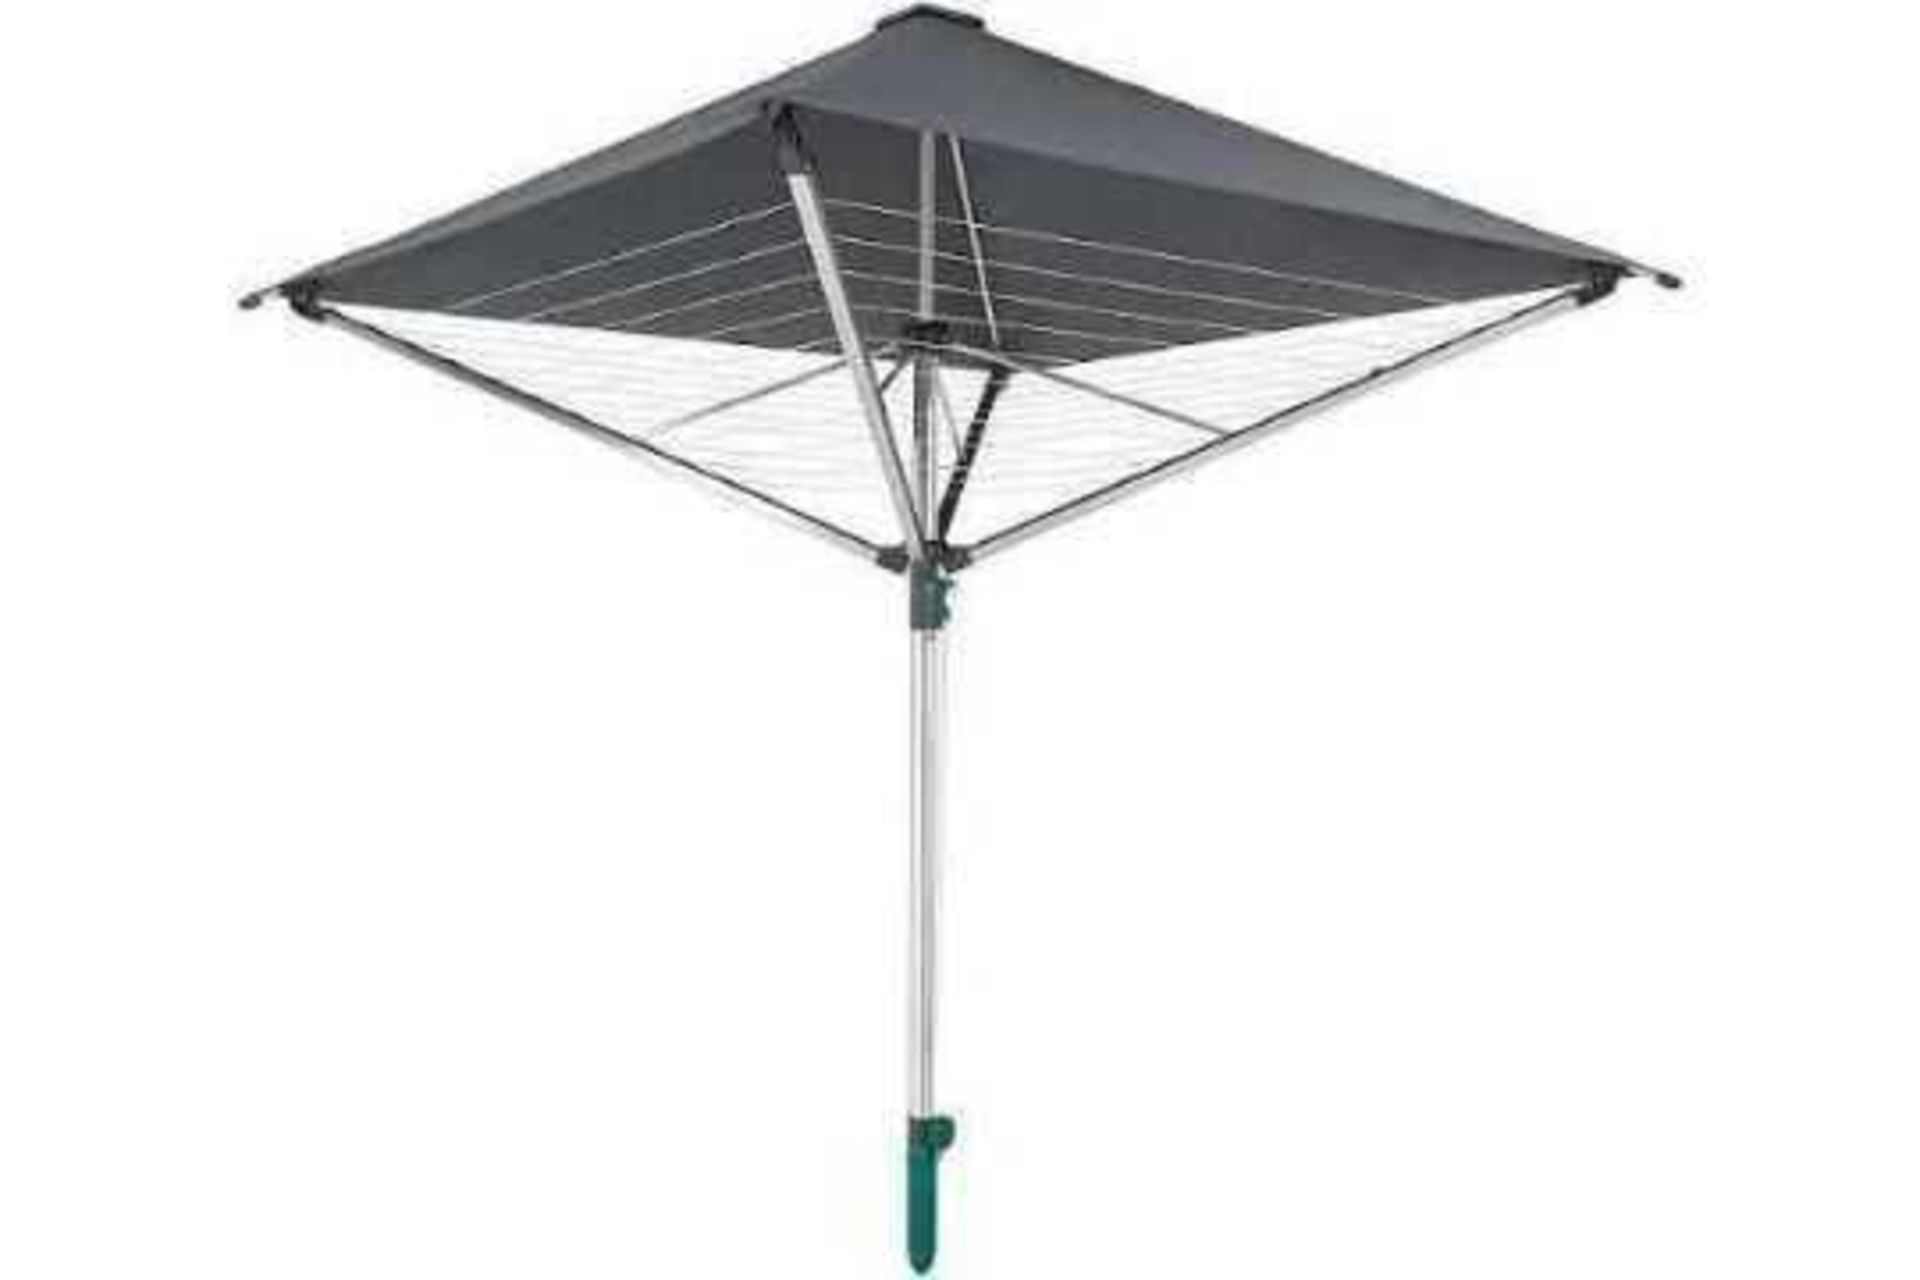 RRP £240 Lot To Contain 1X Bagged Leifheit Rotary Dryer Linoprotect 400, Aluminium - Rustproof, Grey